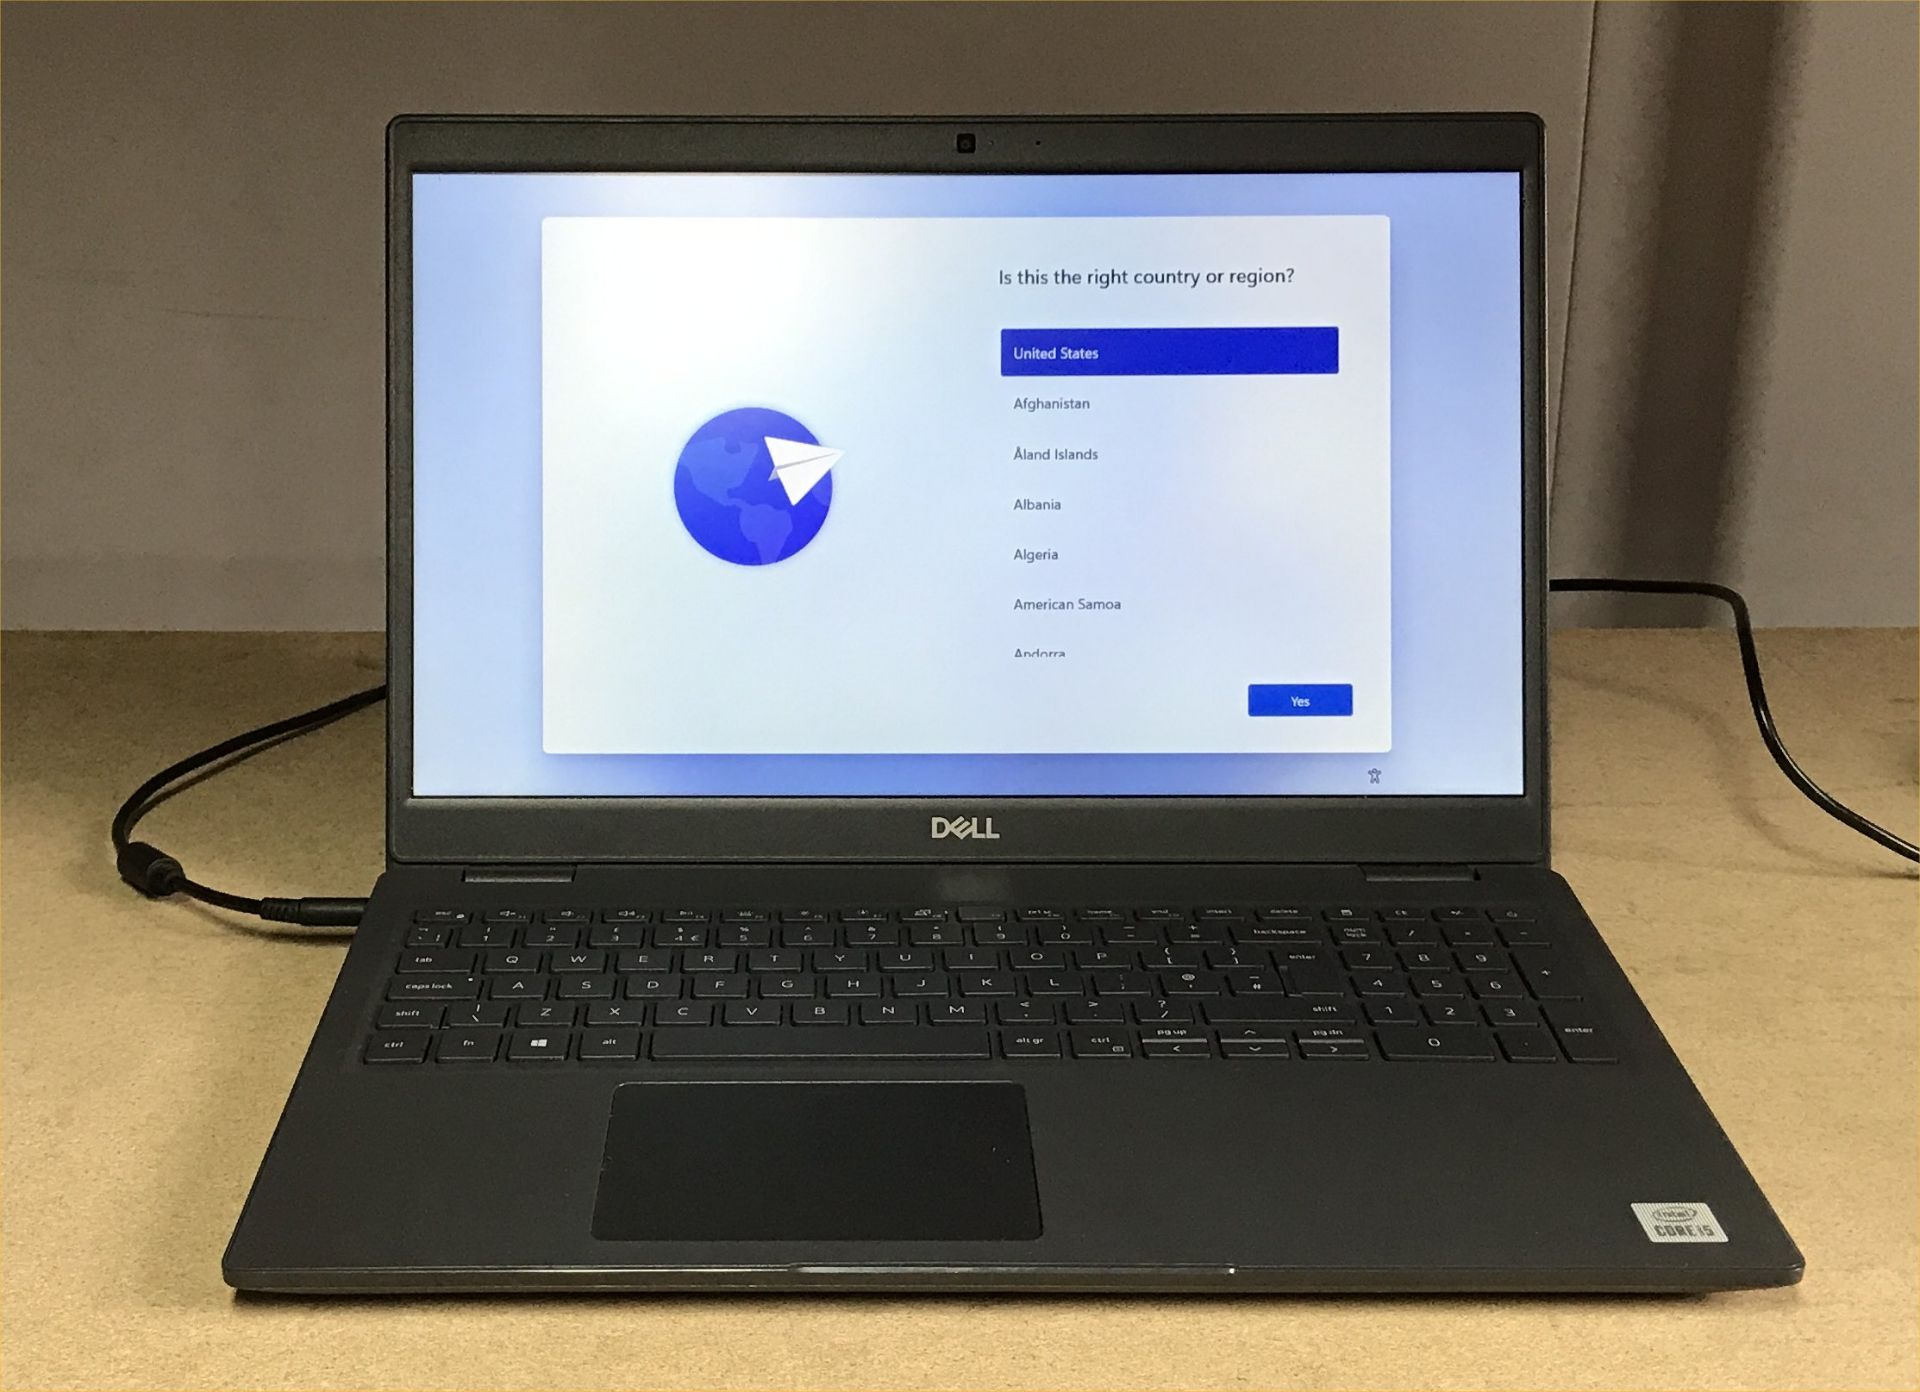 DELL LATITUDE 3510 LAPTOP, INTEL i5-10210U CPU, 8GB RAM, 1TB HDD WITH CHARGER (DATA WIPED &